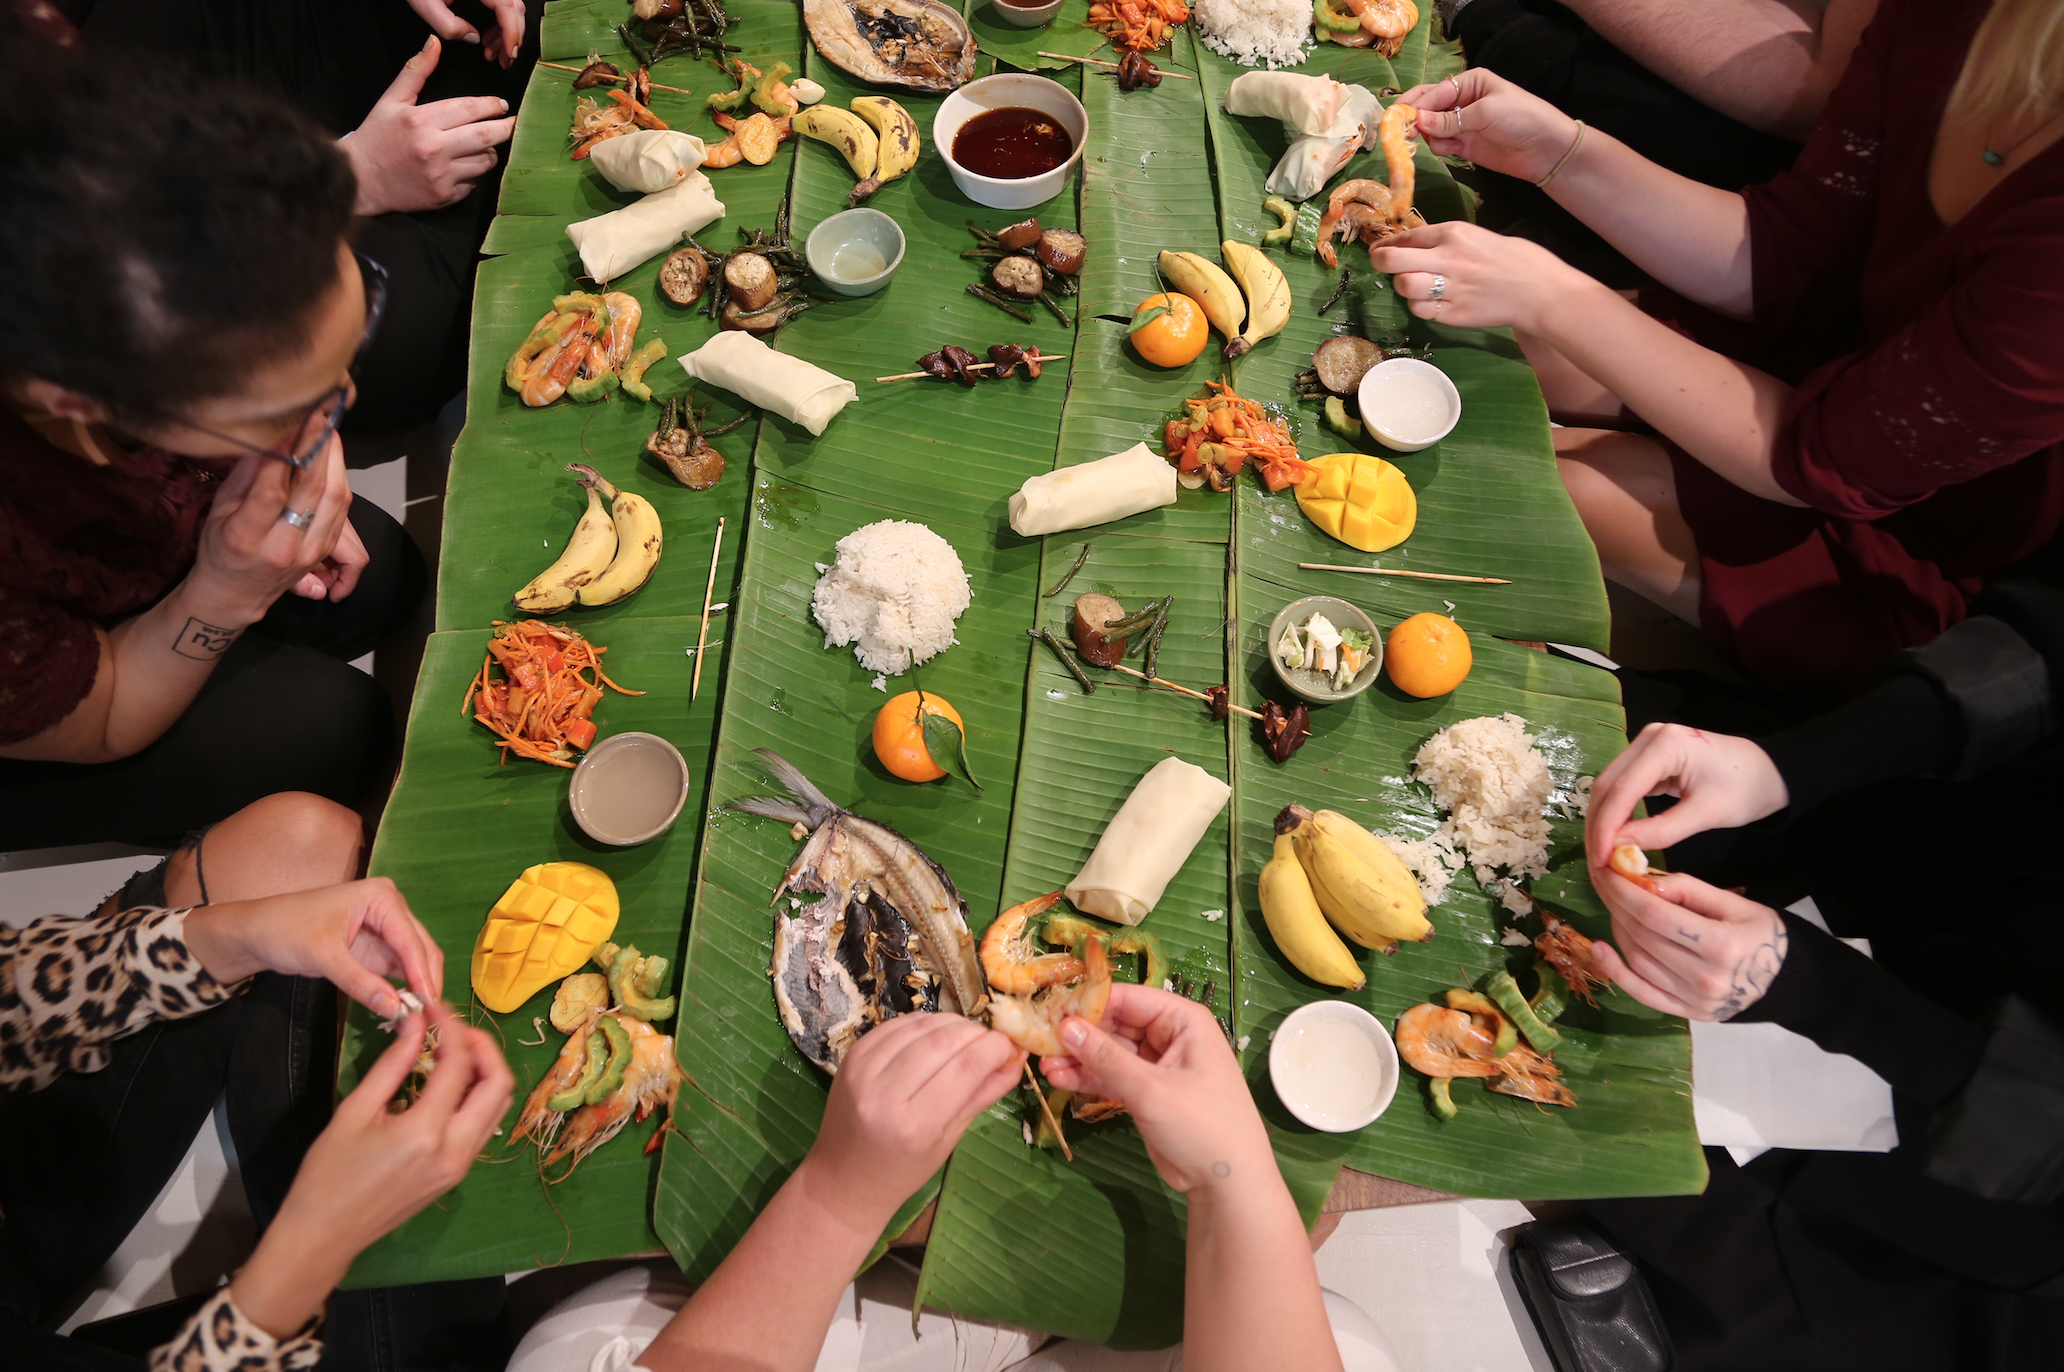 Image: Photo of Devyn's feast held at Ground Level Platform. The photo is taken from overhead and shows bright green banana leaves serving as a long table. On the leaves are various mounds and pieces of food such as a clump of white rice, halved and diced yellow mangoes, tangerines with a single green leaf still attached to them, and pairs of small and plump bananas in their peels. There are people all around the edges of the table touching the food with their hands, picking things apart. Photo courtesy of the artist.